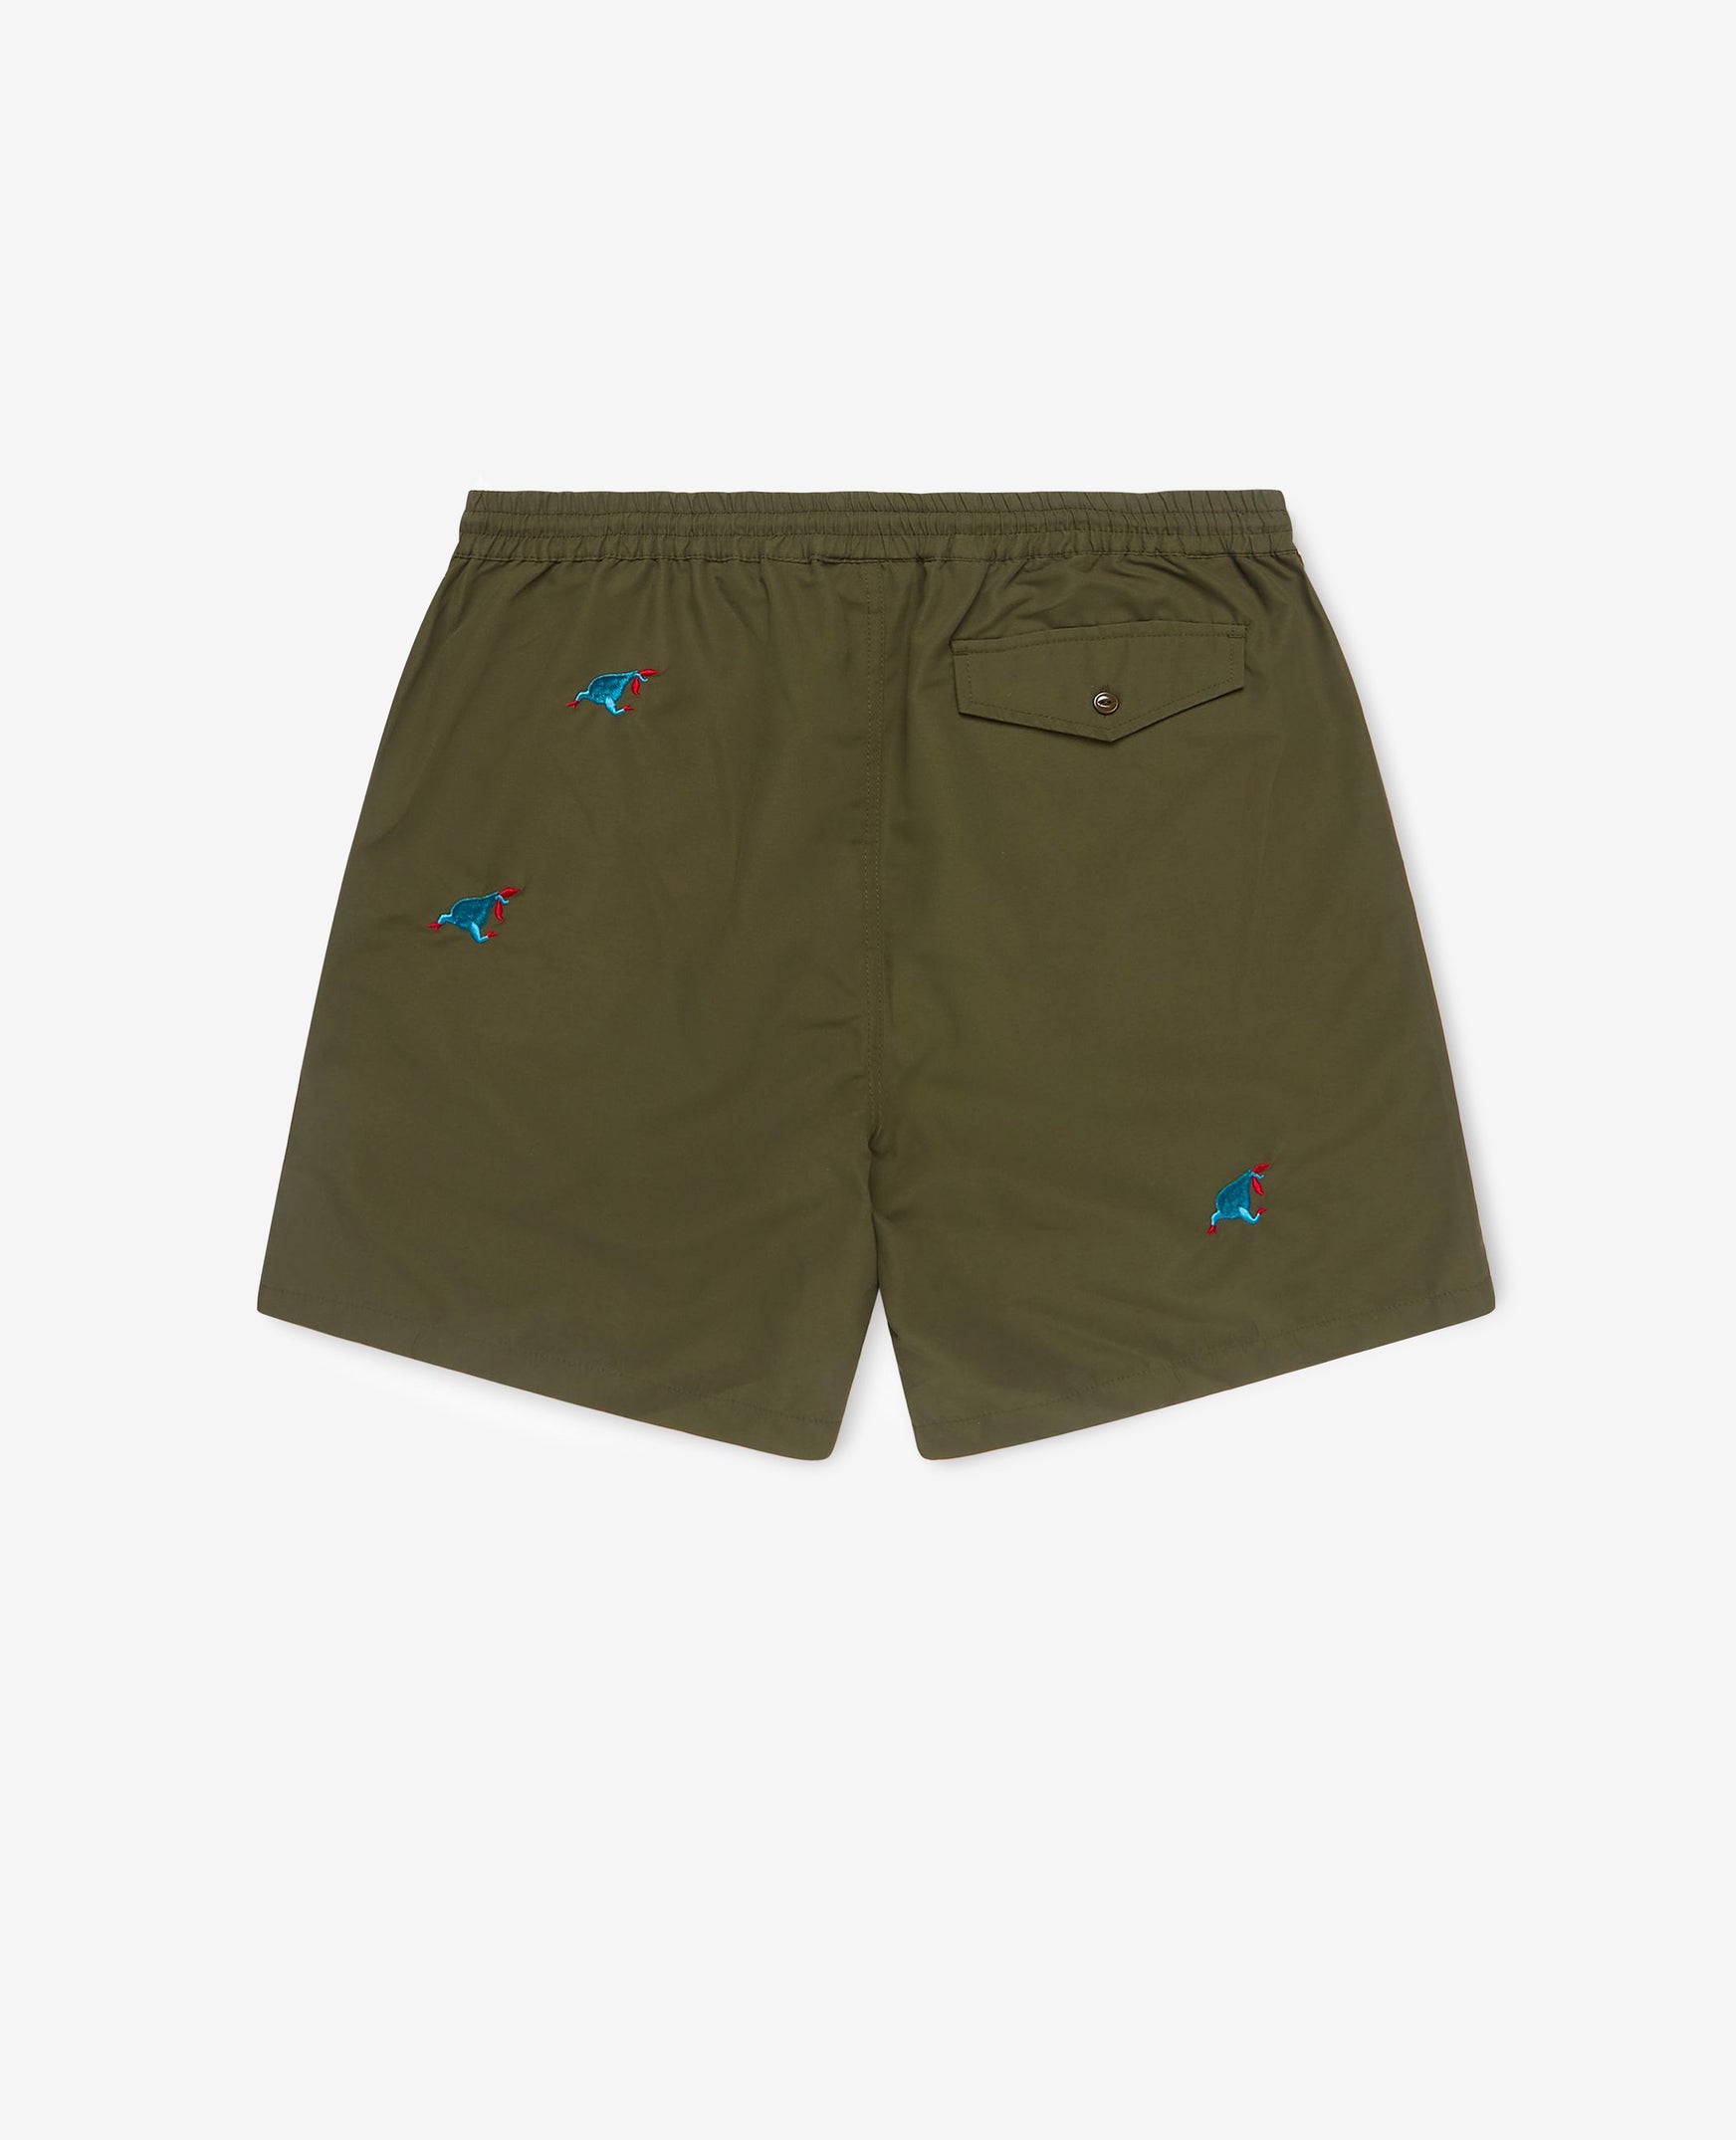 byParra Running Pear Swim Shorts (Olive)